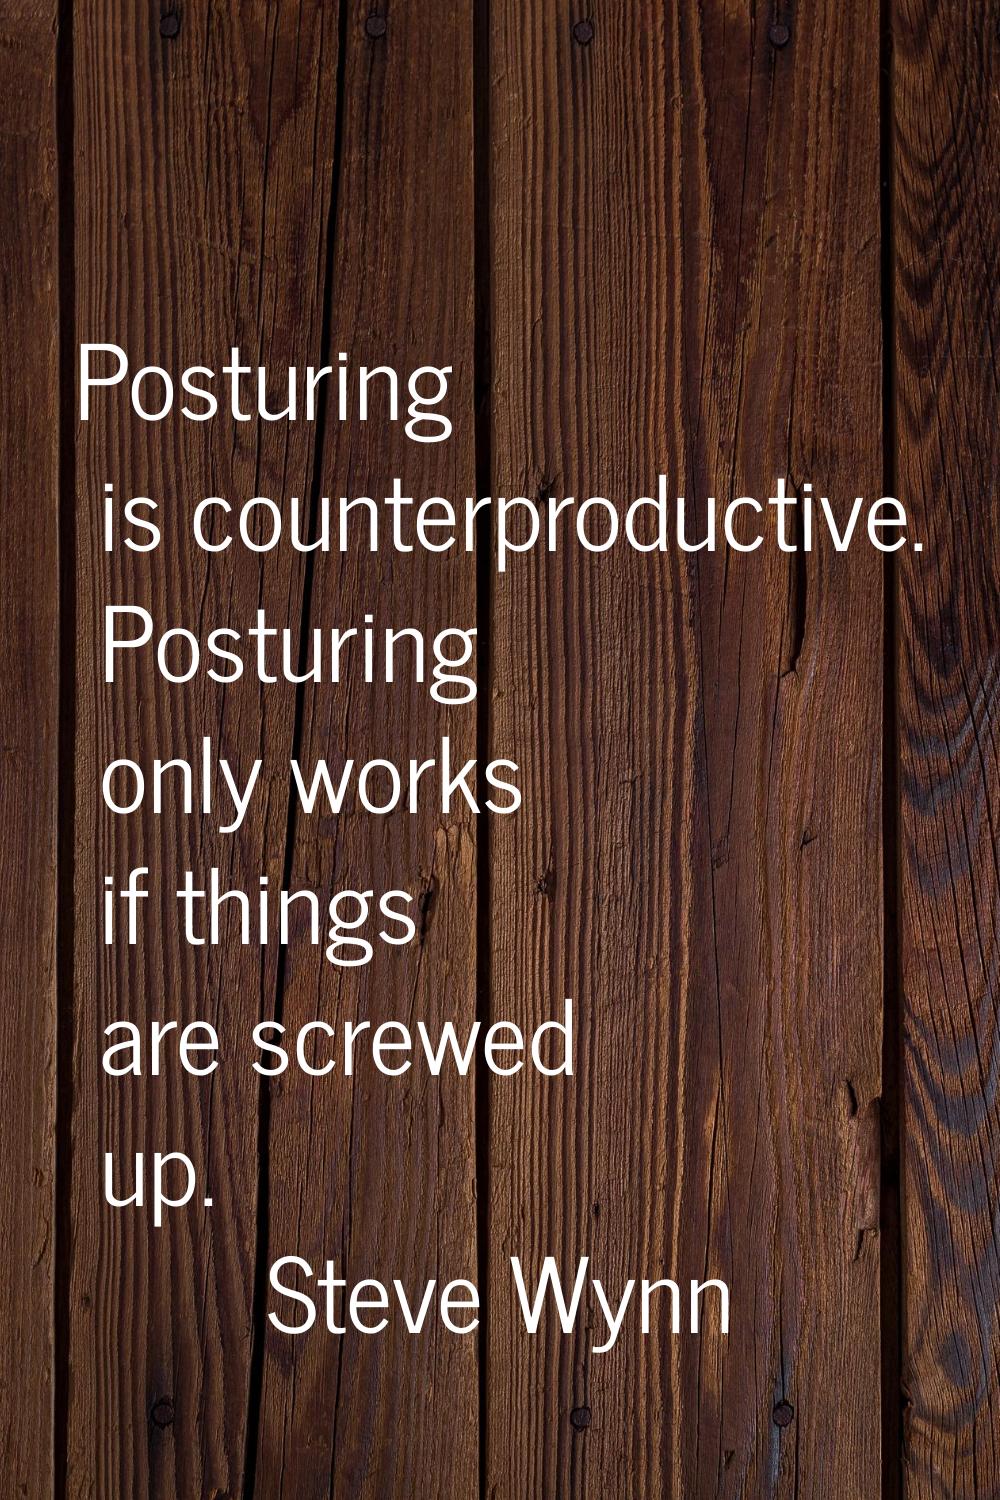 Posturing is counterproductive. Posturing only works if things are screwed up.